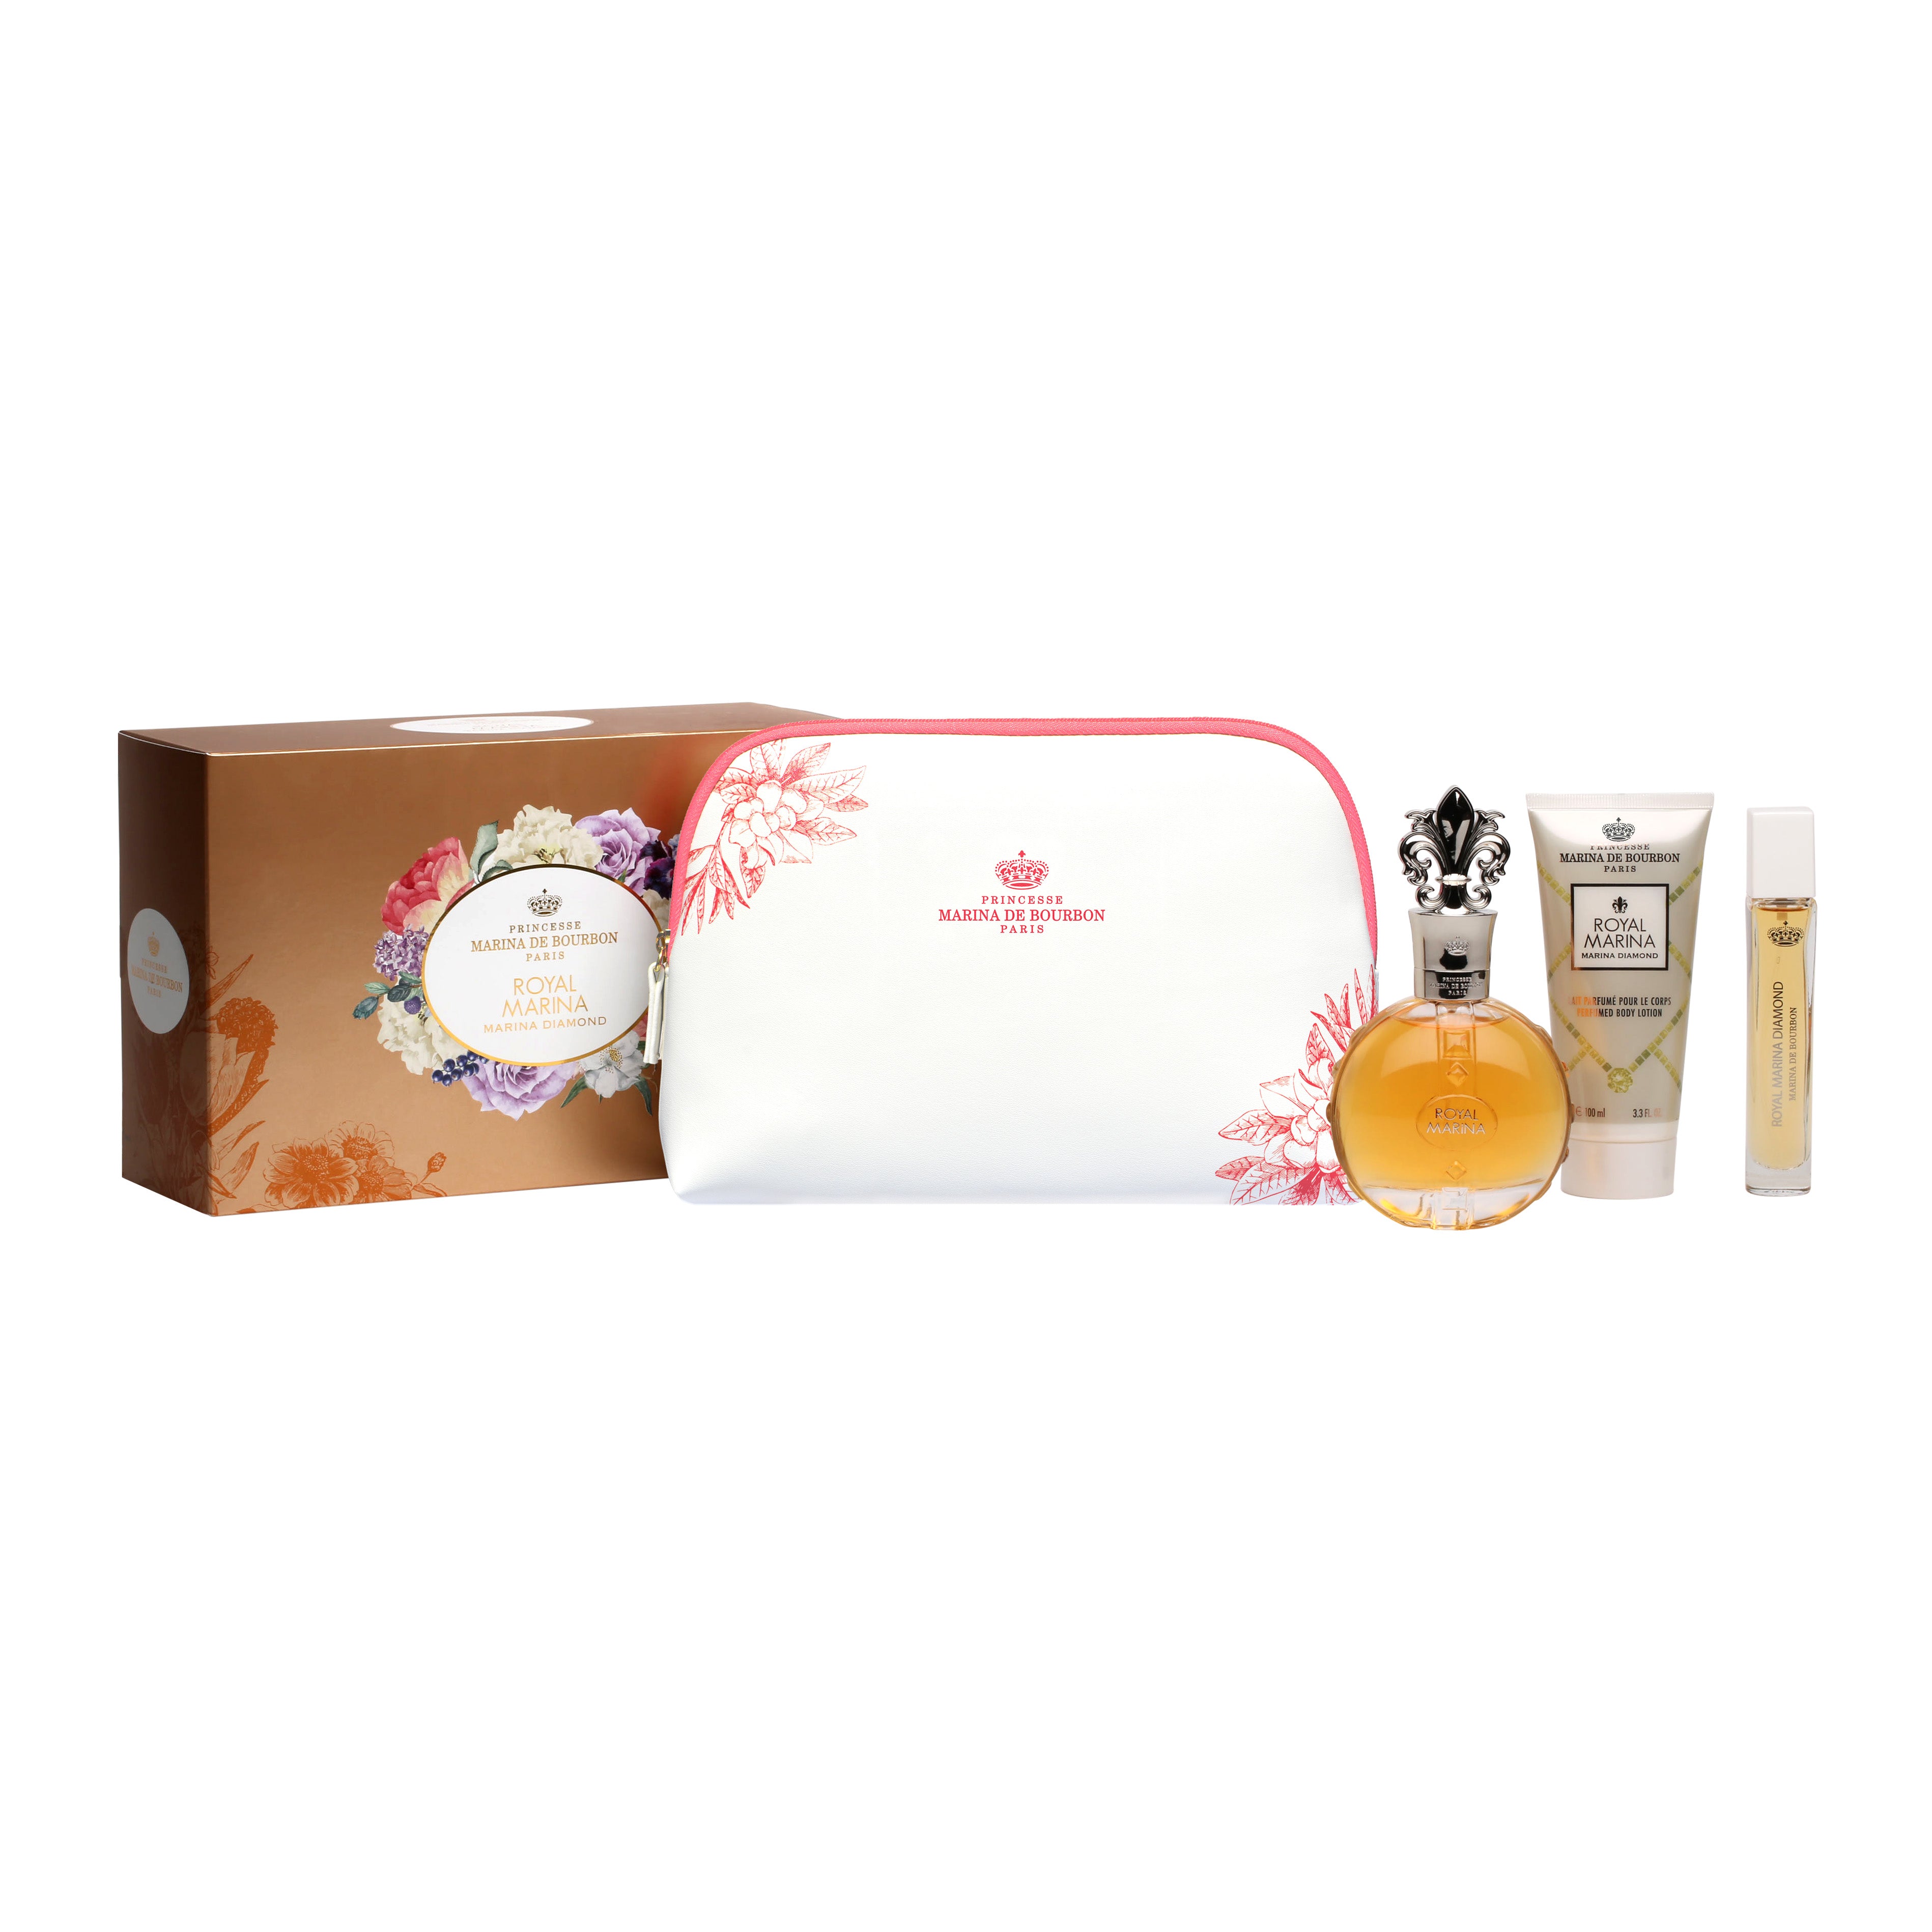 ROYAL MARINA DIAMOND 100ml Gift Set - A pouch and the perfumed body lotion offered